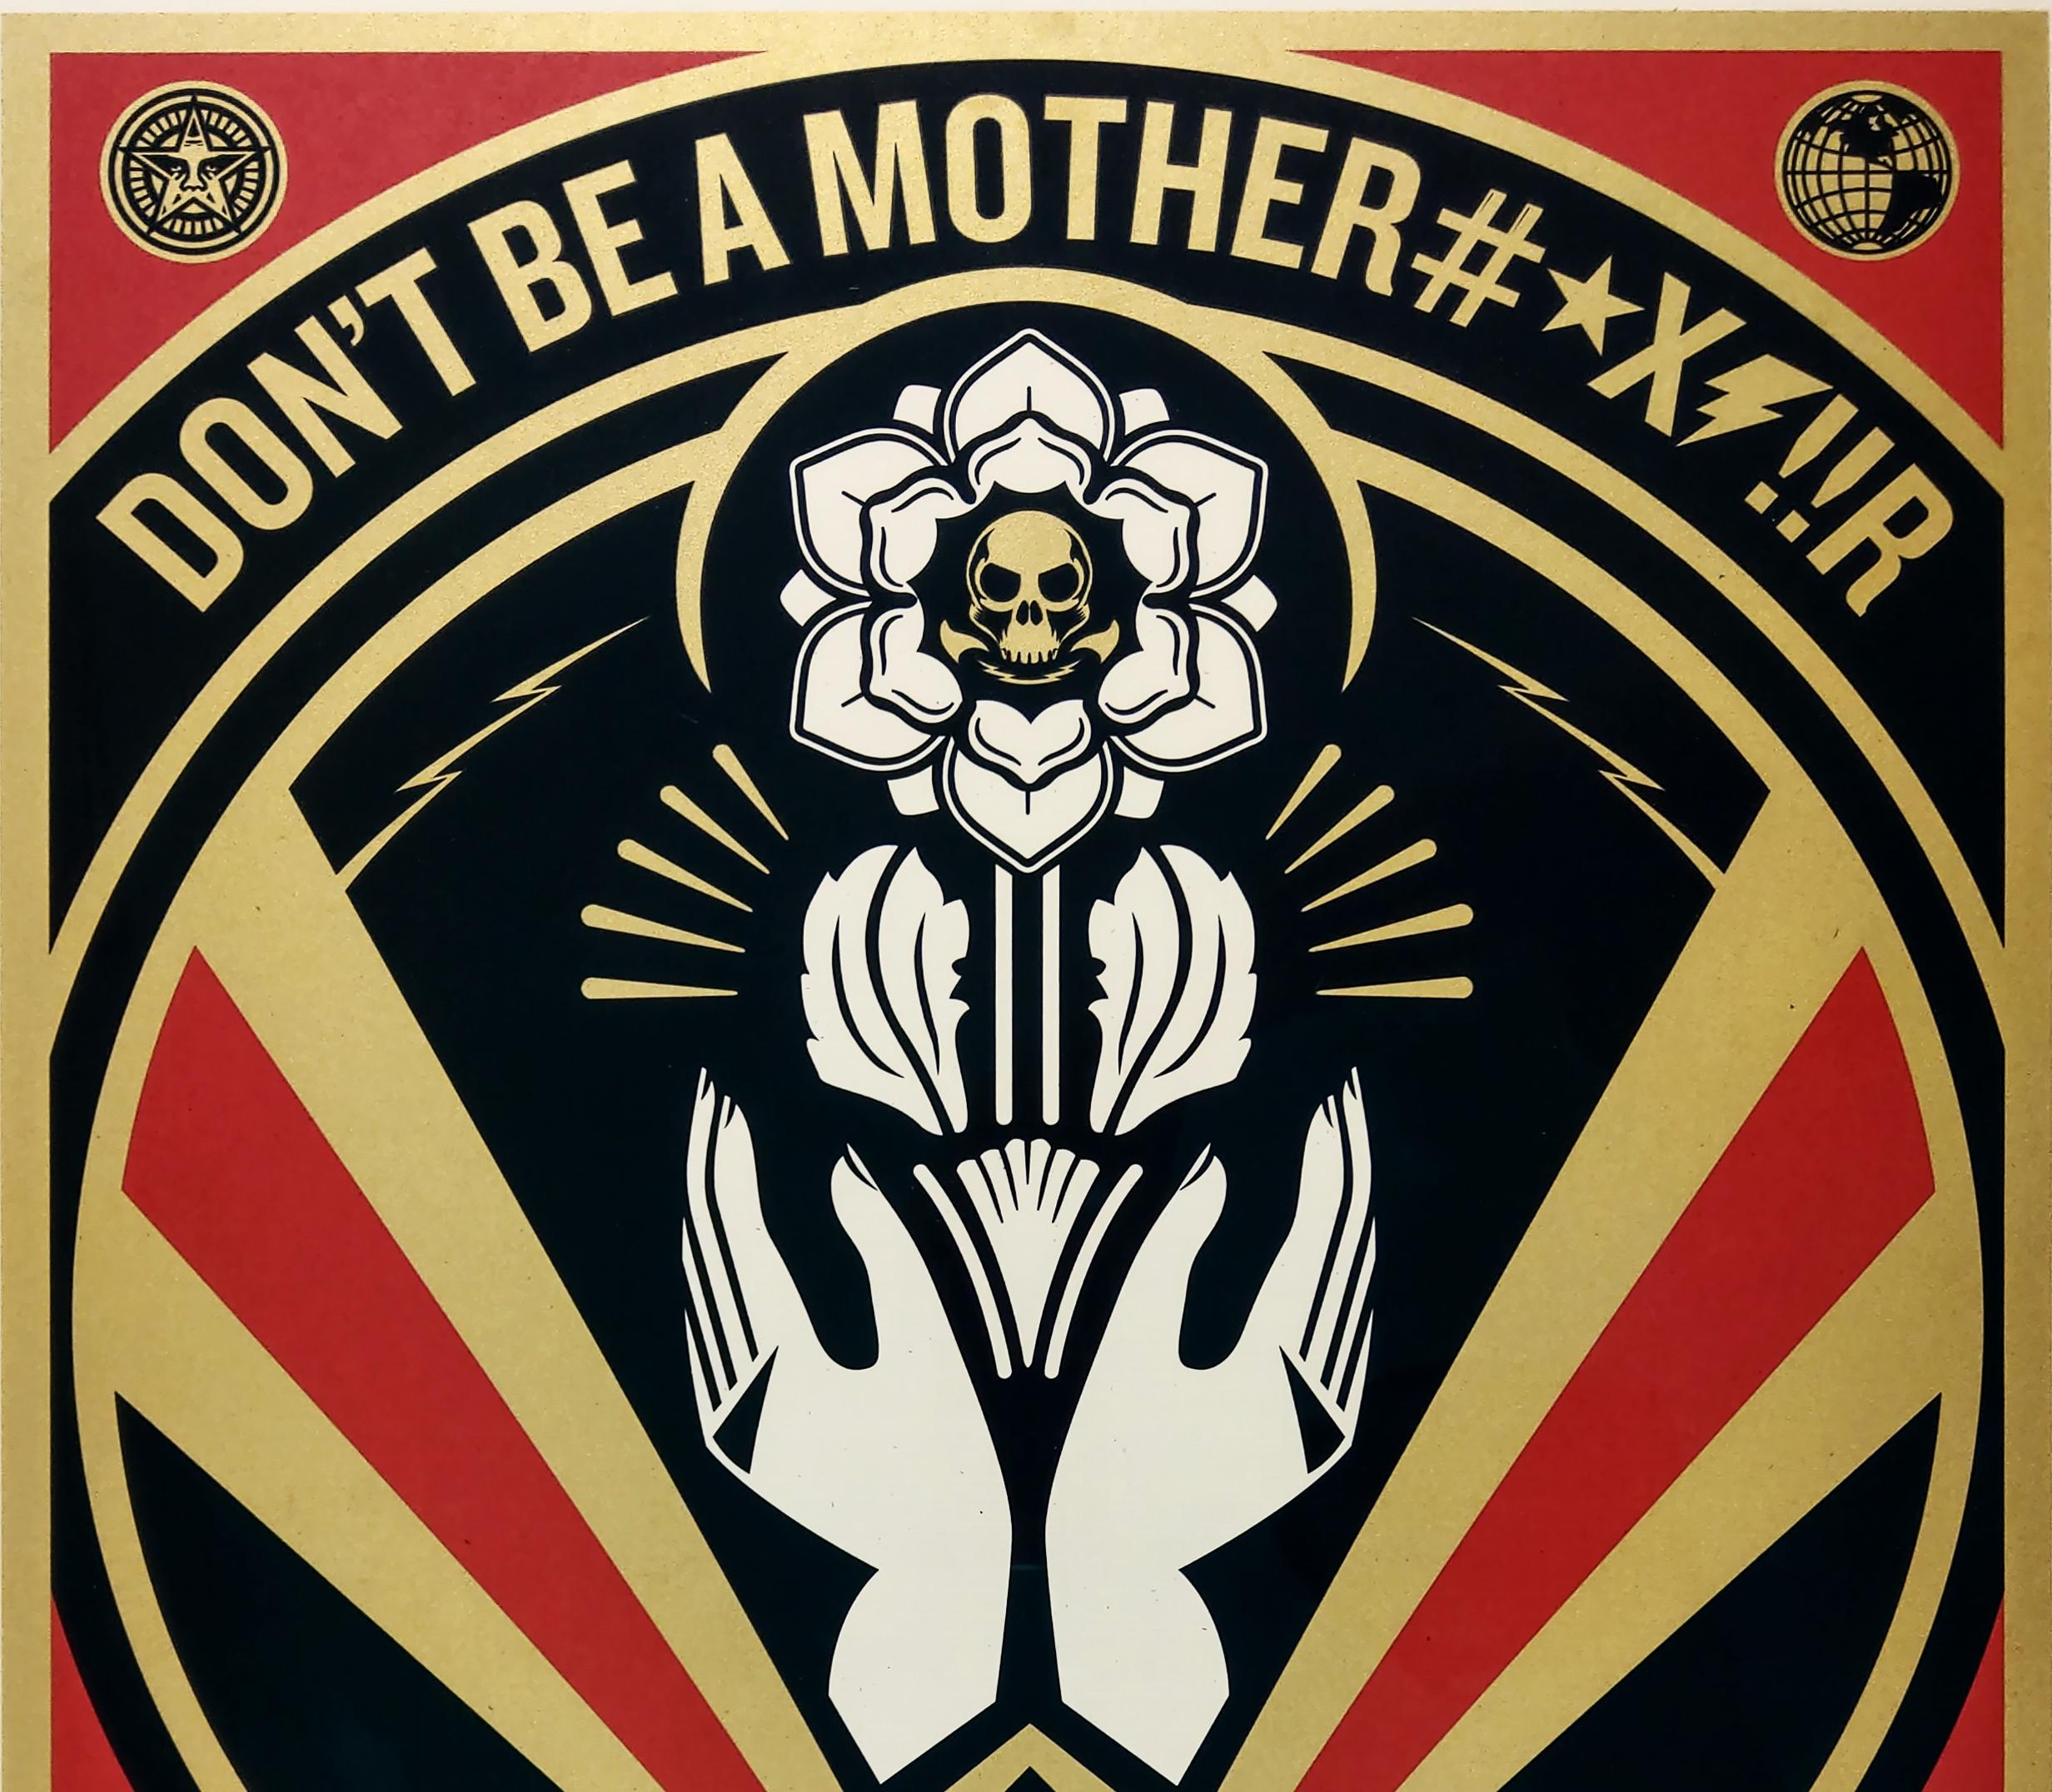 Don’t Be A MFR. 18 x 24 inches. Screen print on cream Speckletone paper. Signed by Shepard Fairey. Numbered edition of 450.
 
Shepard Fairey is a major influencer in the street art movement along side Banksy, Mr. Brainwash, and others. He has gained